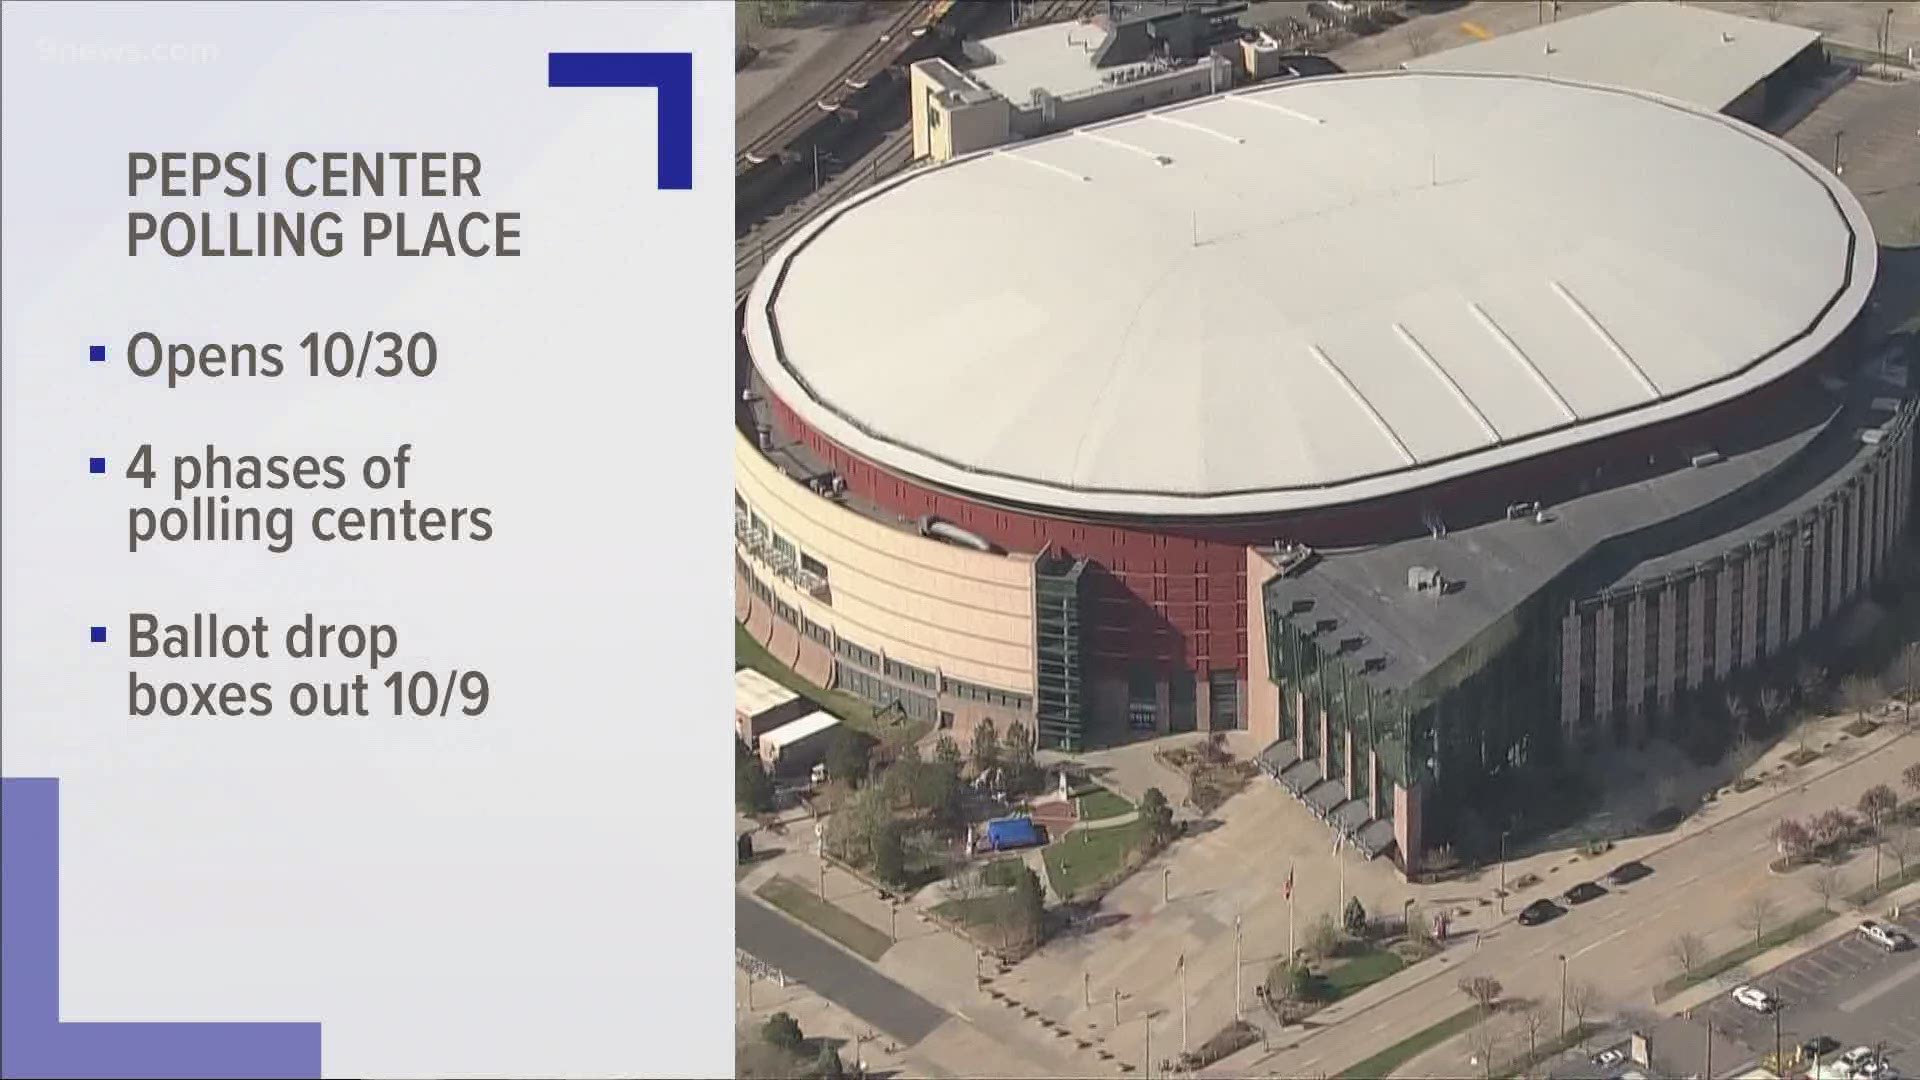 The Pepsi Center is already on the list of Denver polling centers